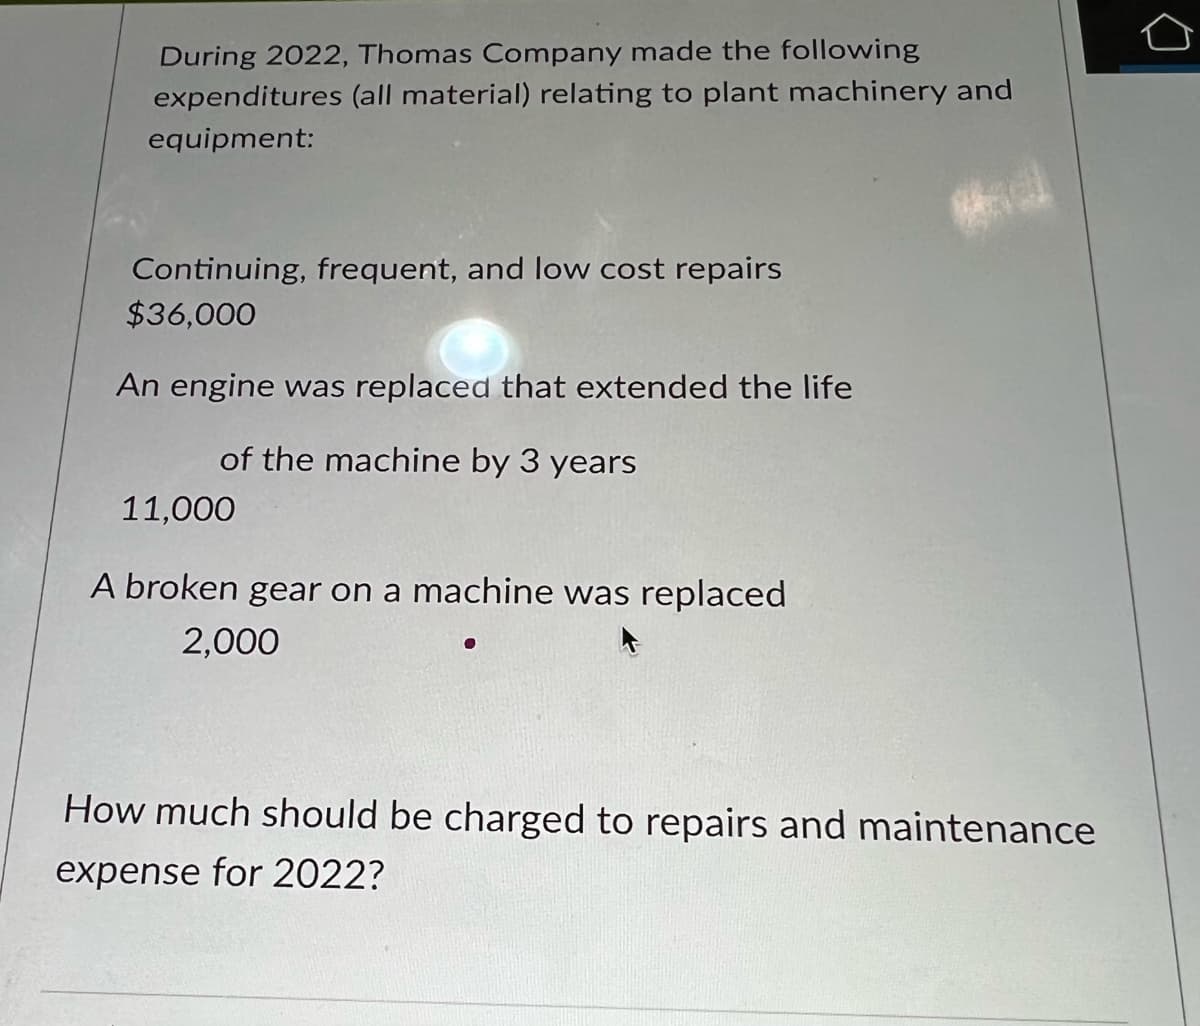 During 2022, Thomas Company made the following
expenditures (all material) relating to plant machinery and
equipment:
Continuing, frequent, and low cost repairs
$36,000
An engine was replaced that extended the life
of the machine by 3 years
11,000
A broken gear on a machine was replaced
2,000
How much should be charged to repairs and maintenance
expense for 2022?